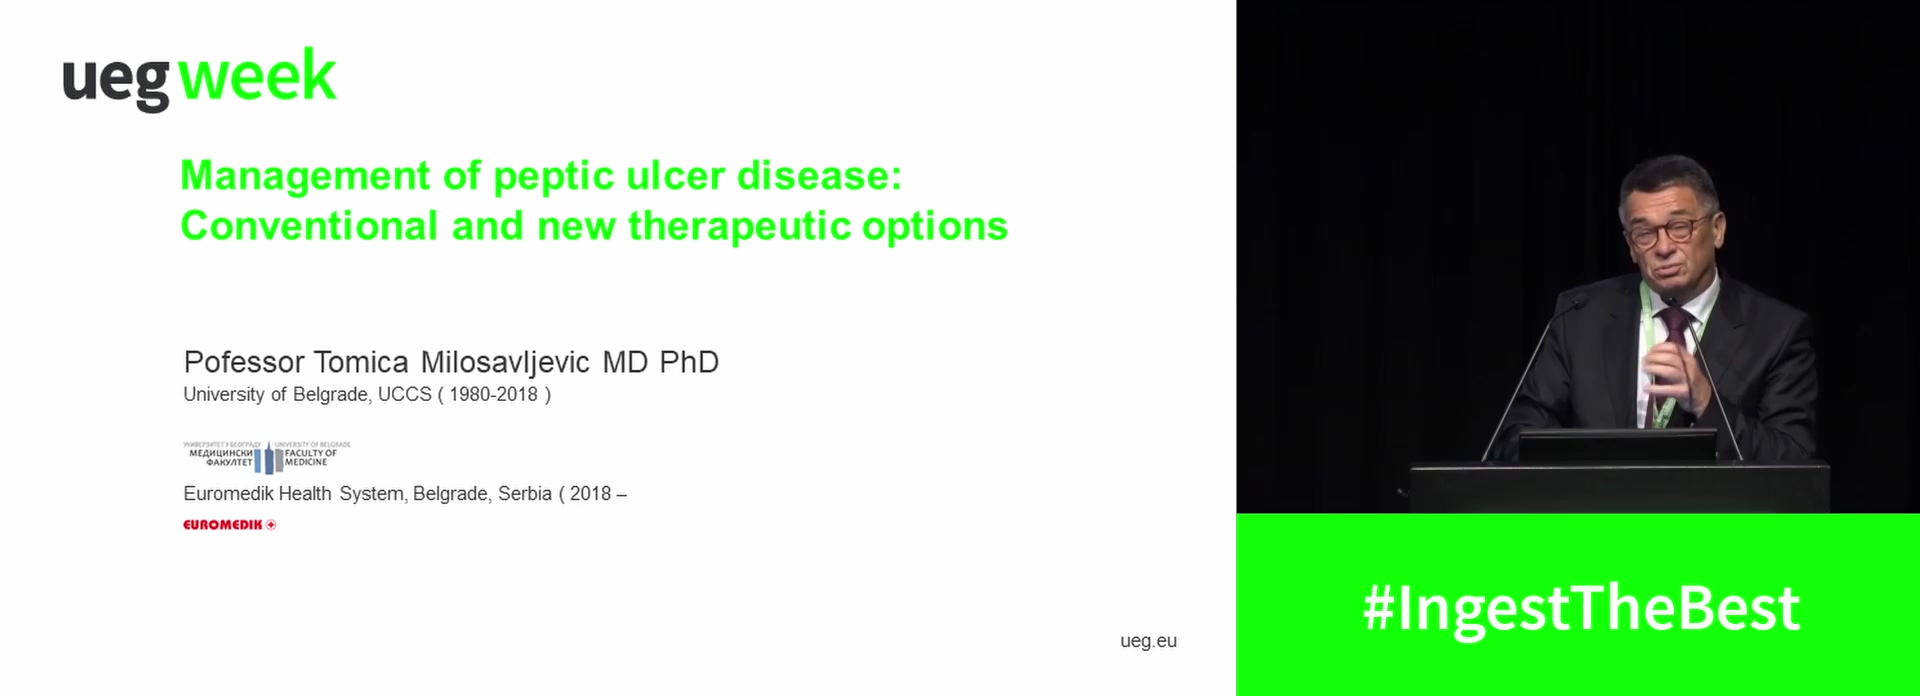 Management of peptic ulcer disease: Conventional and new therapeutic options